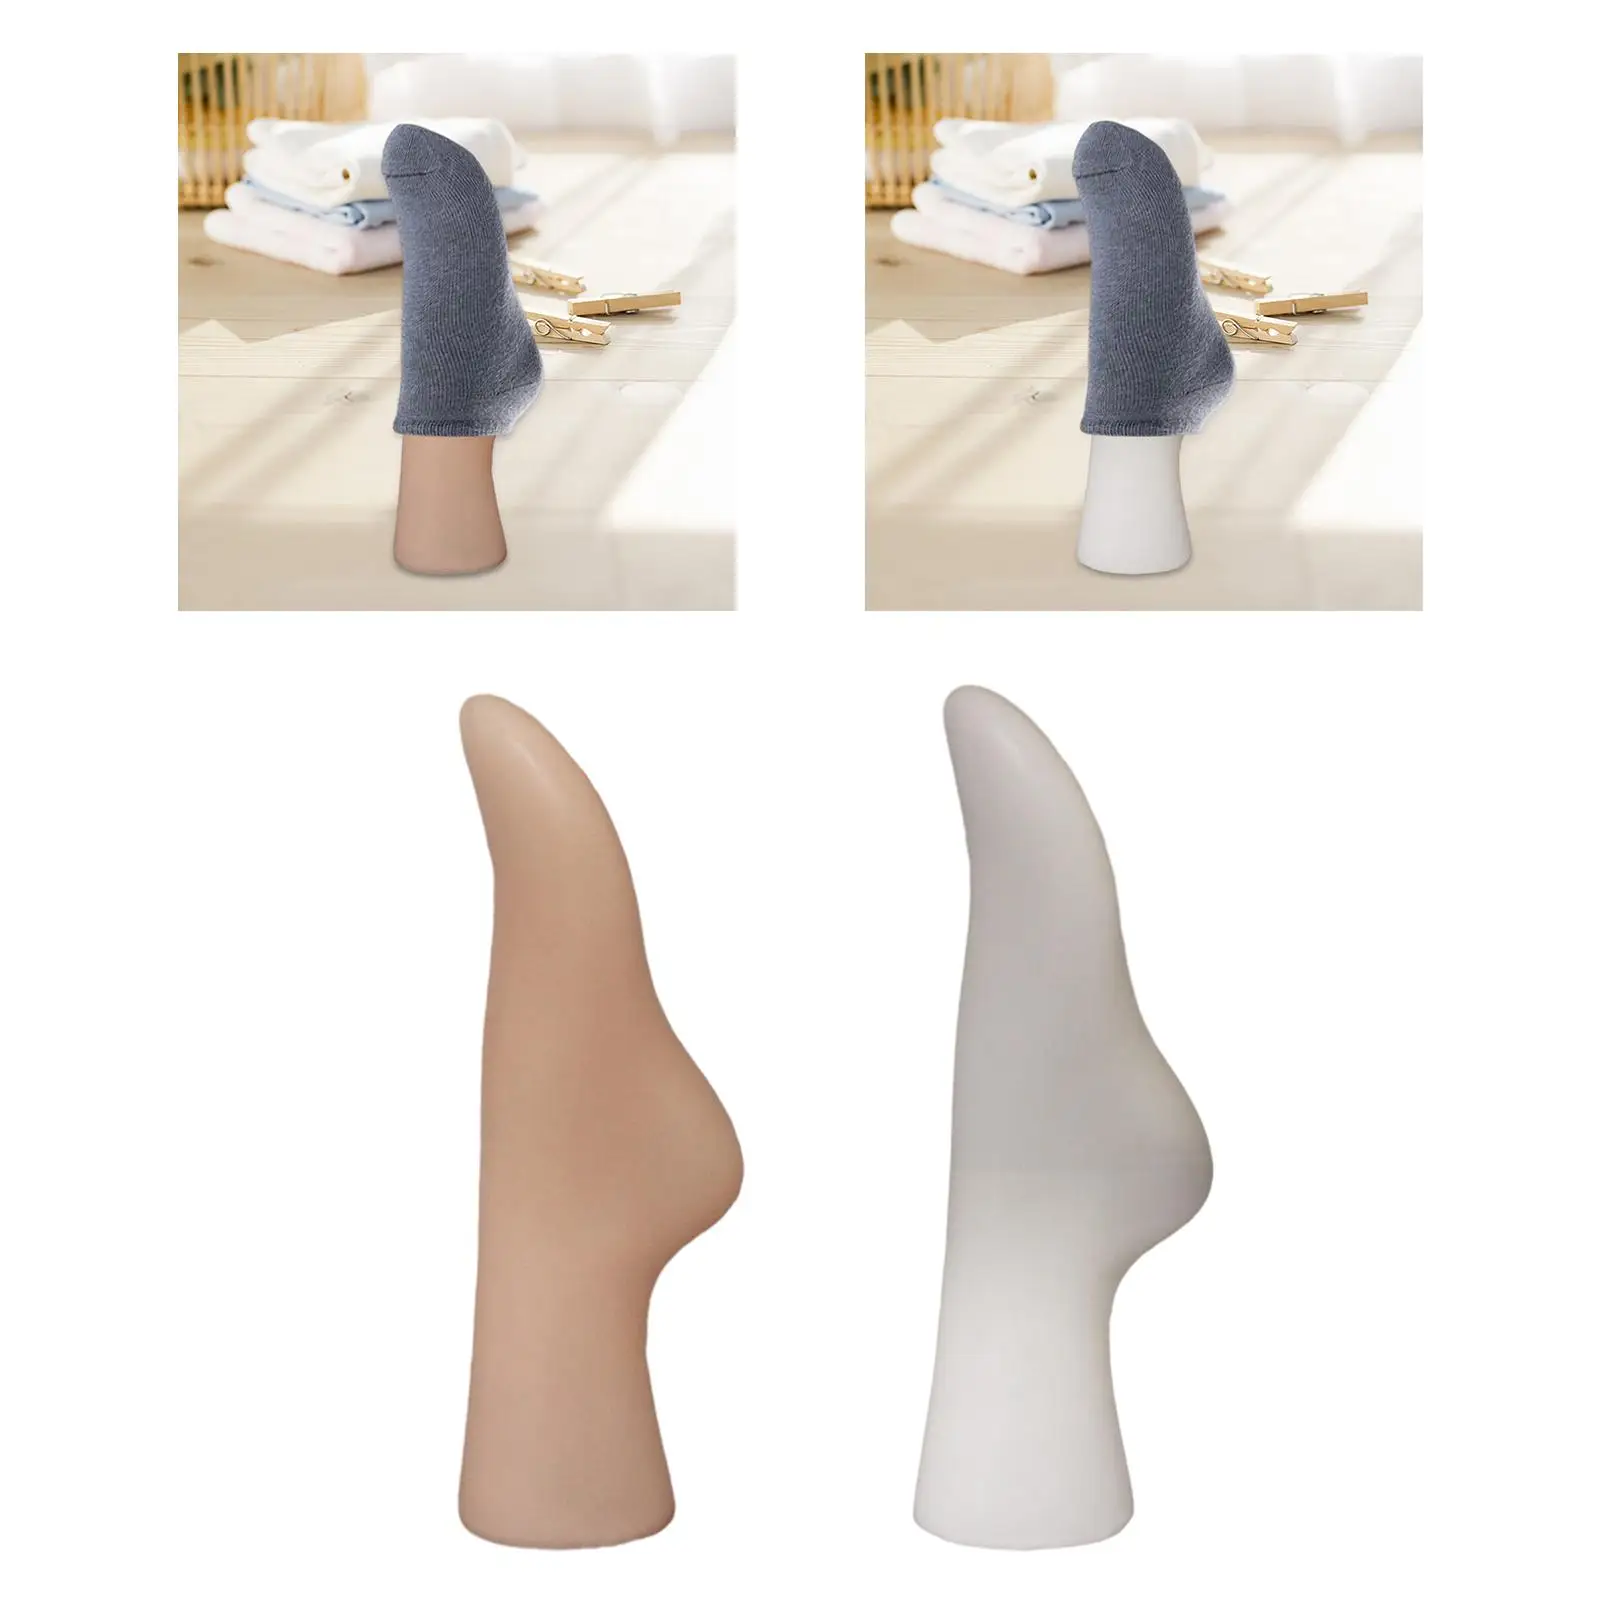 Female Mannequin Foot Stand Rack Women Foot Sock Display Medium Stocking Display for Slippers Shop Retail Chains Jewelry Home